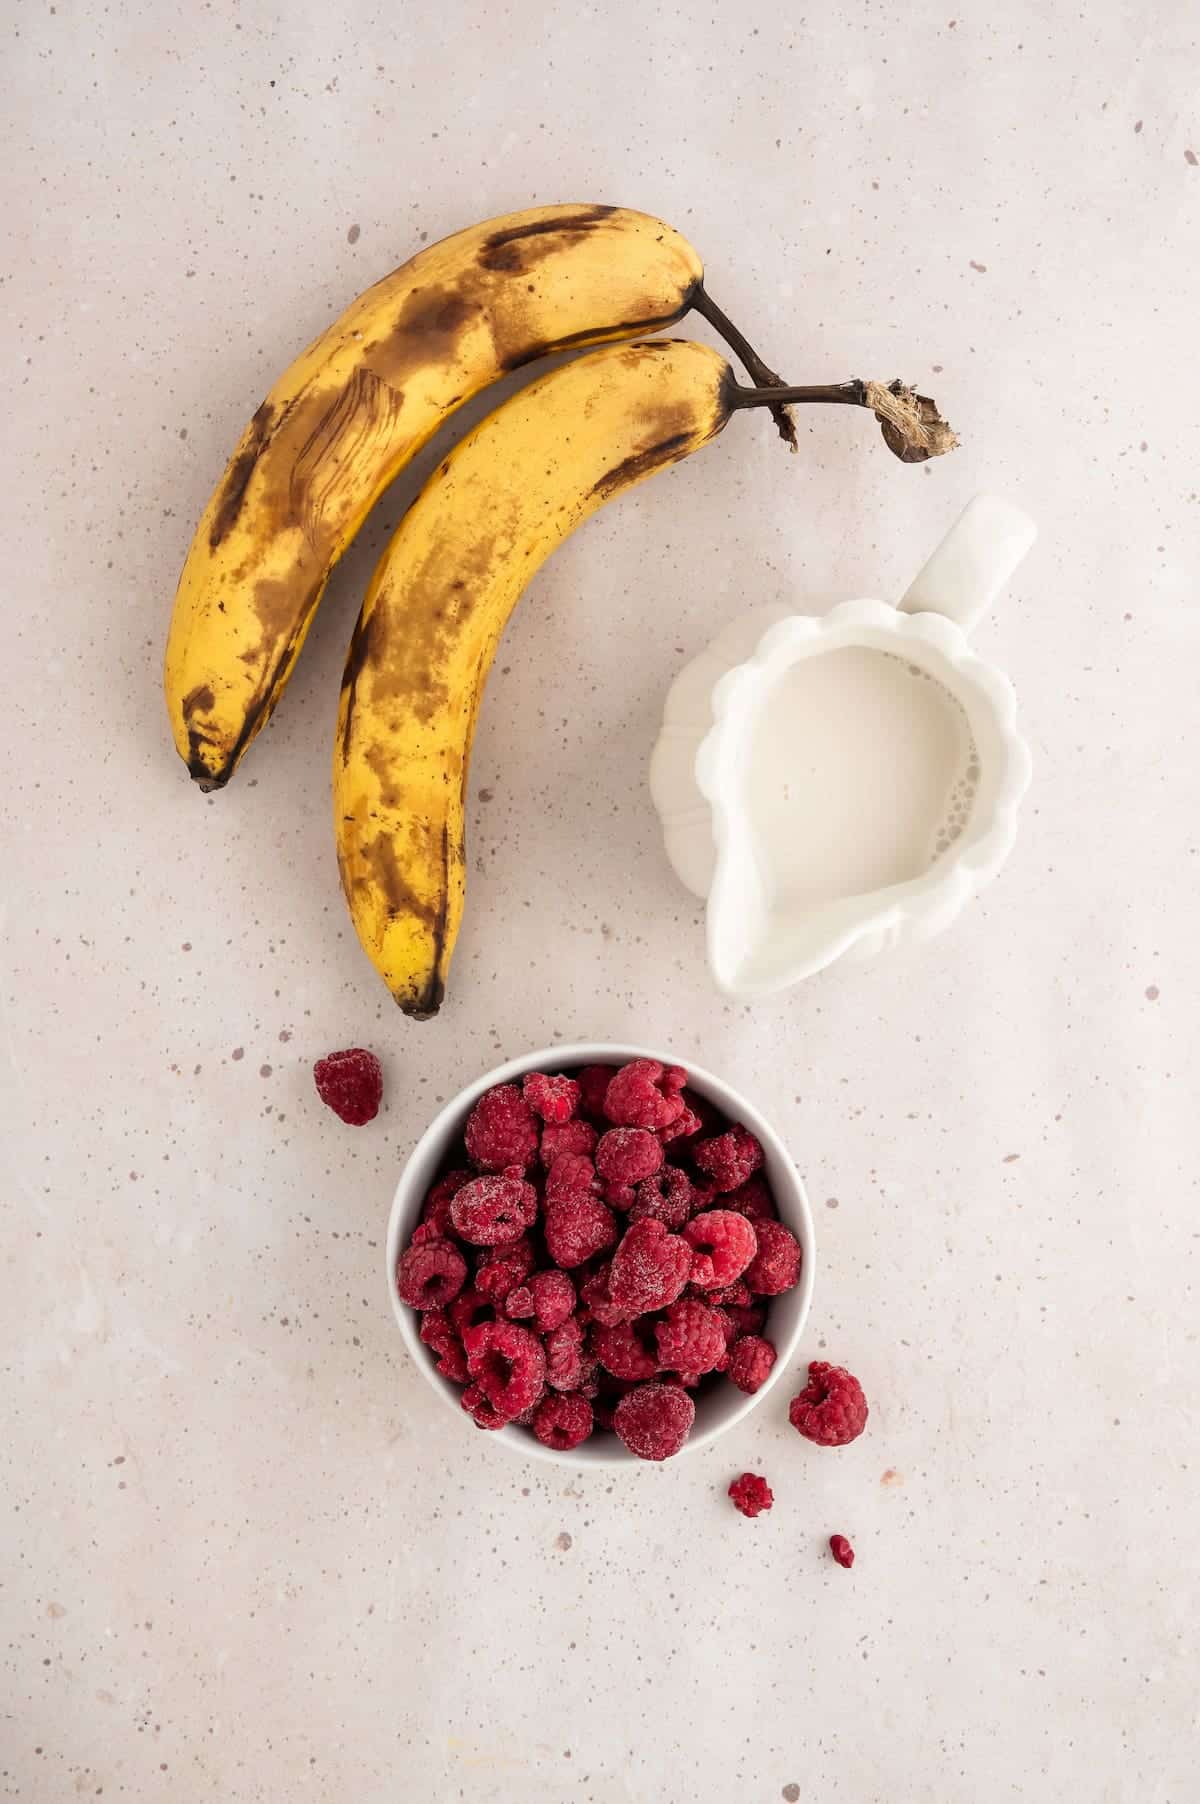 Ingredients for a raspberry smoothie.